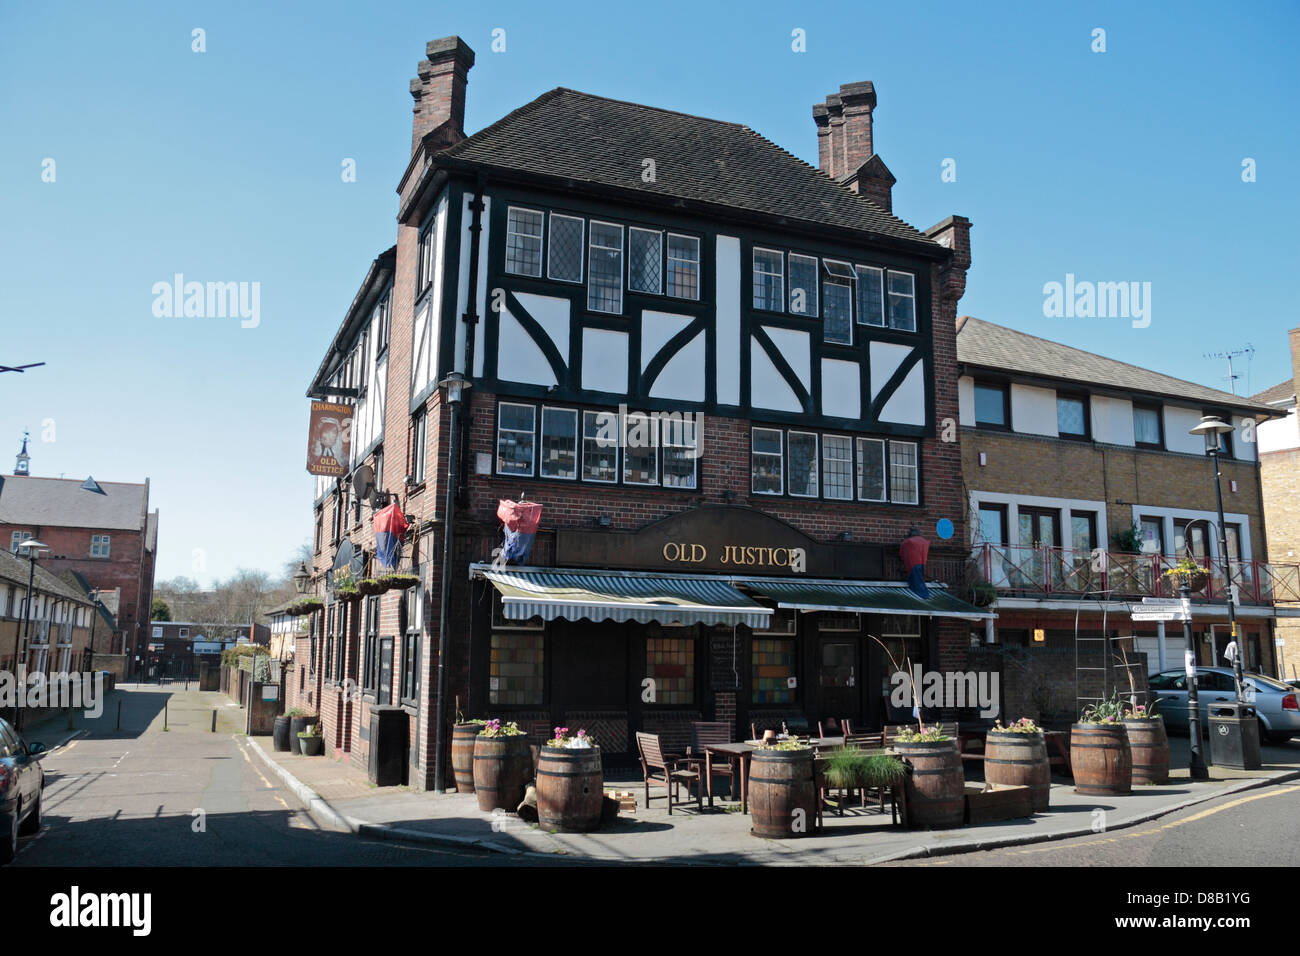 The Old Justice public house, Bermondsey Wall East, Rotherhithe, London, SE16, UK. Stock Photo